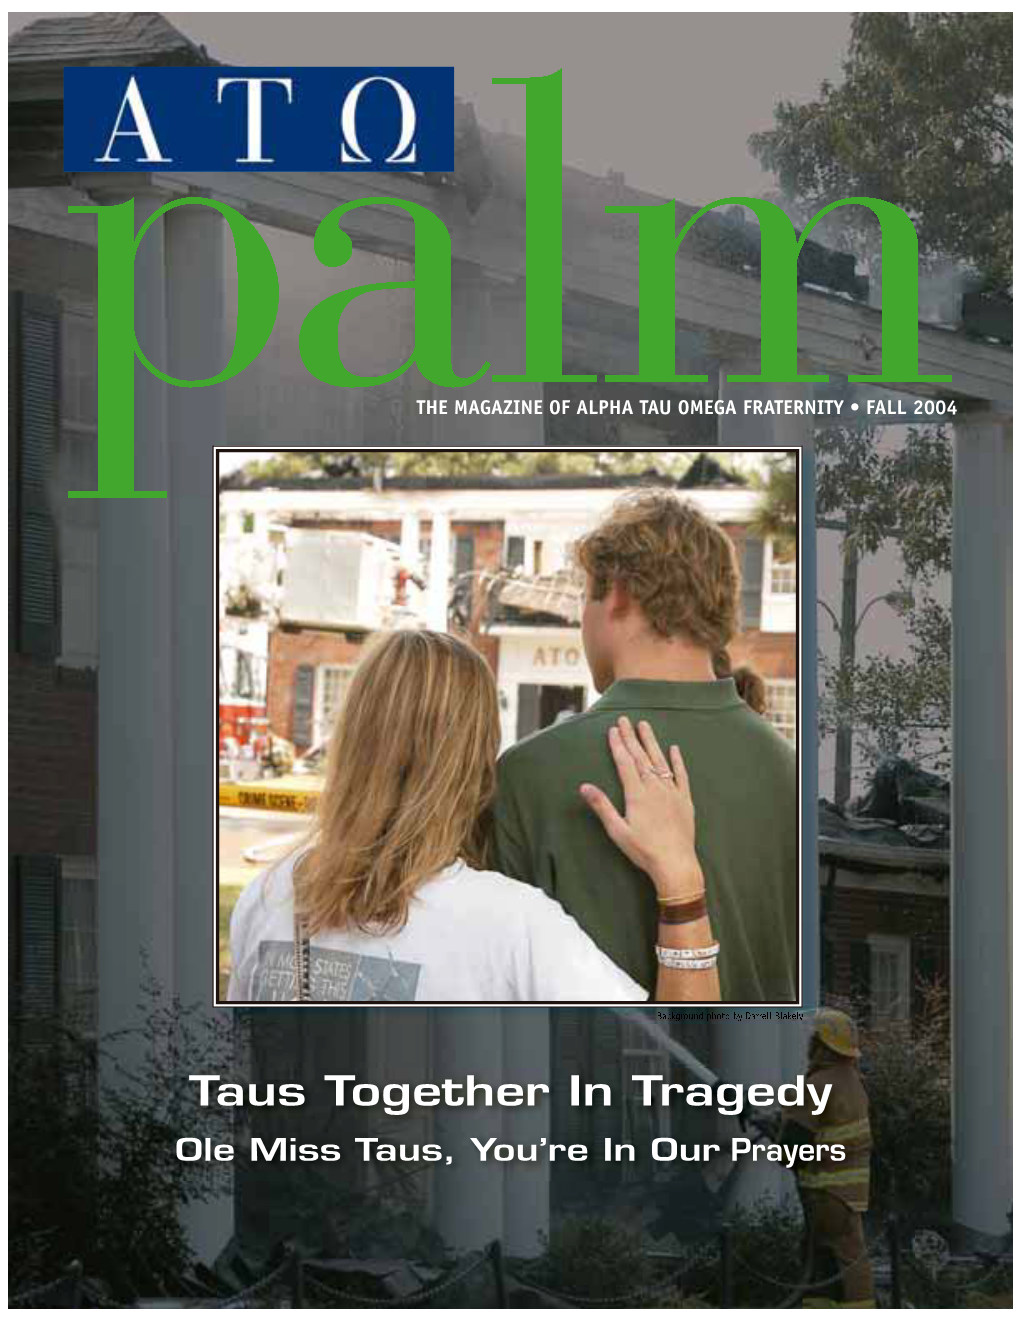 Taus Together in Tragedy Ole Miss Taus, You’Re in Our Prayers